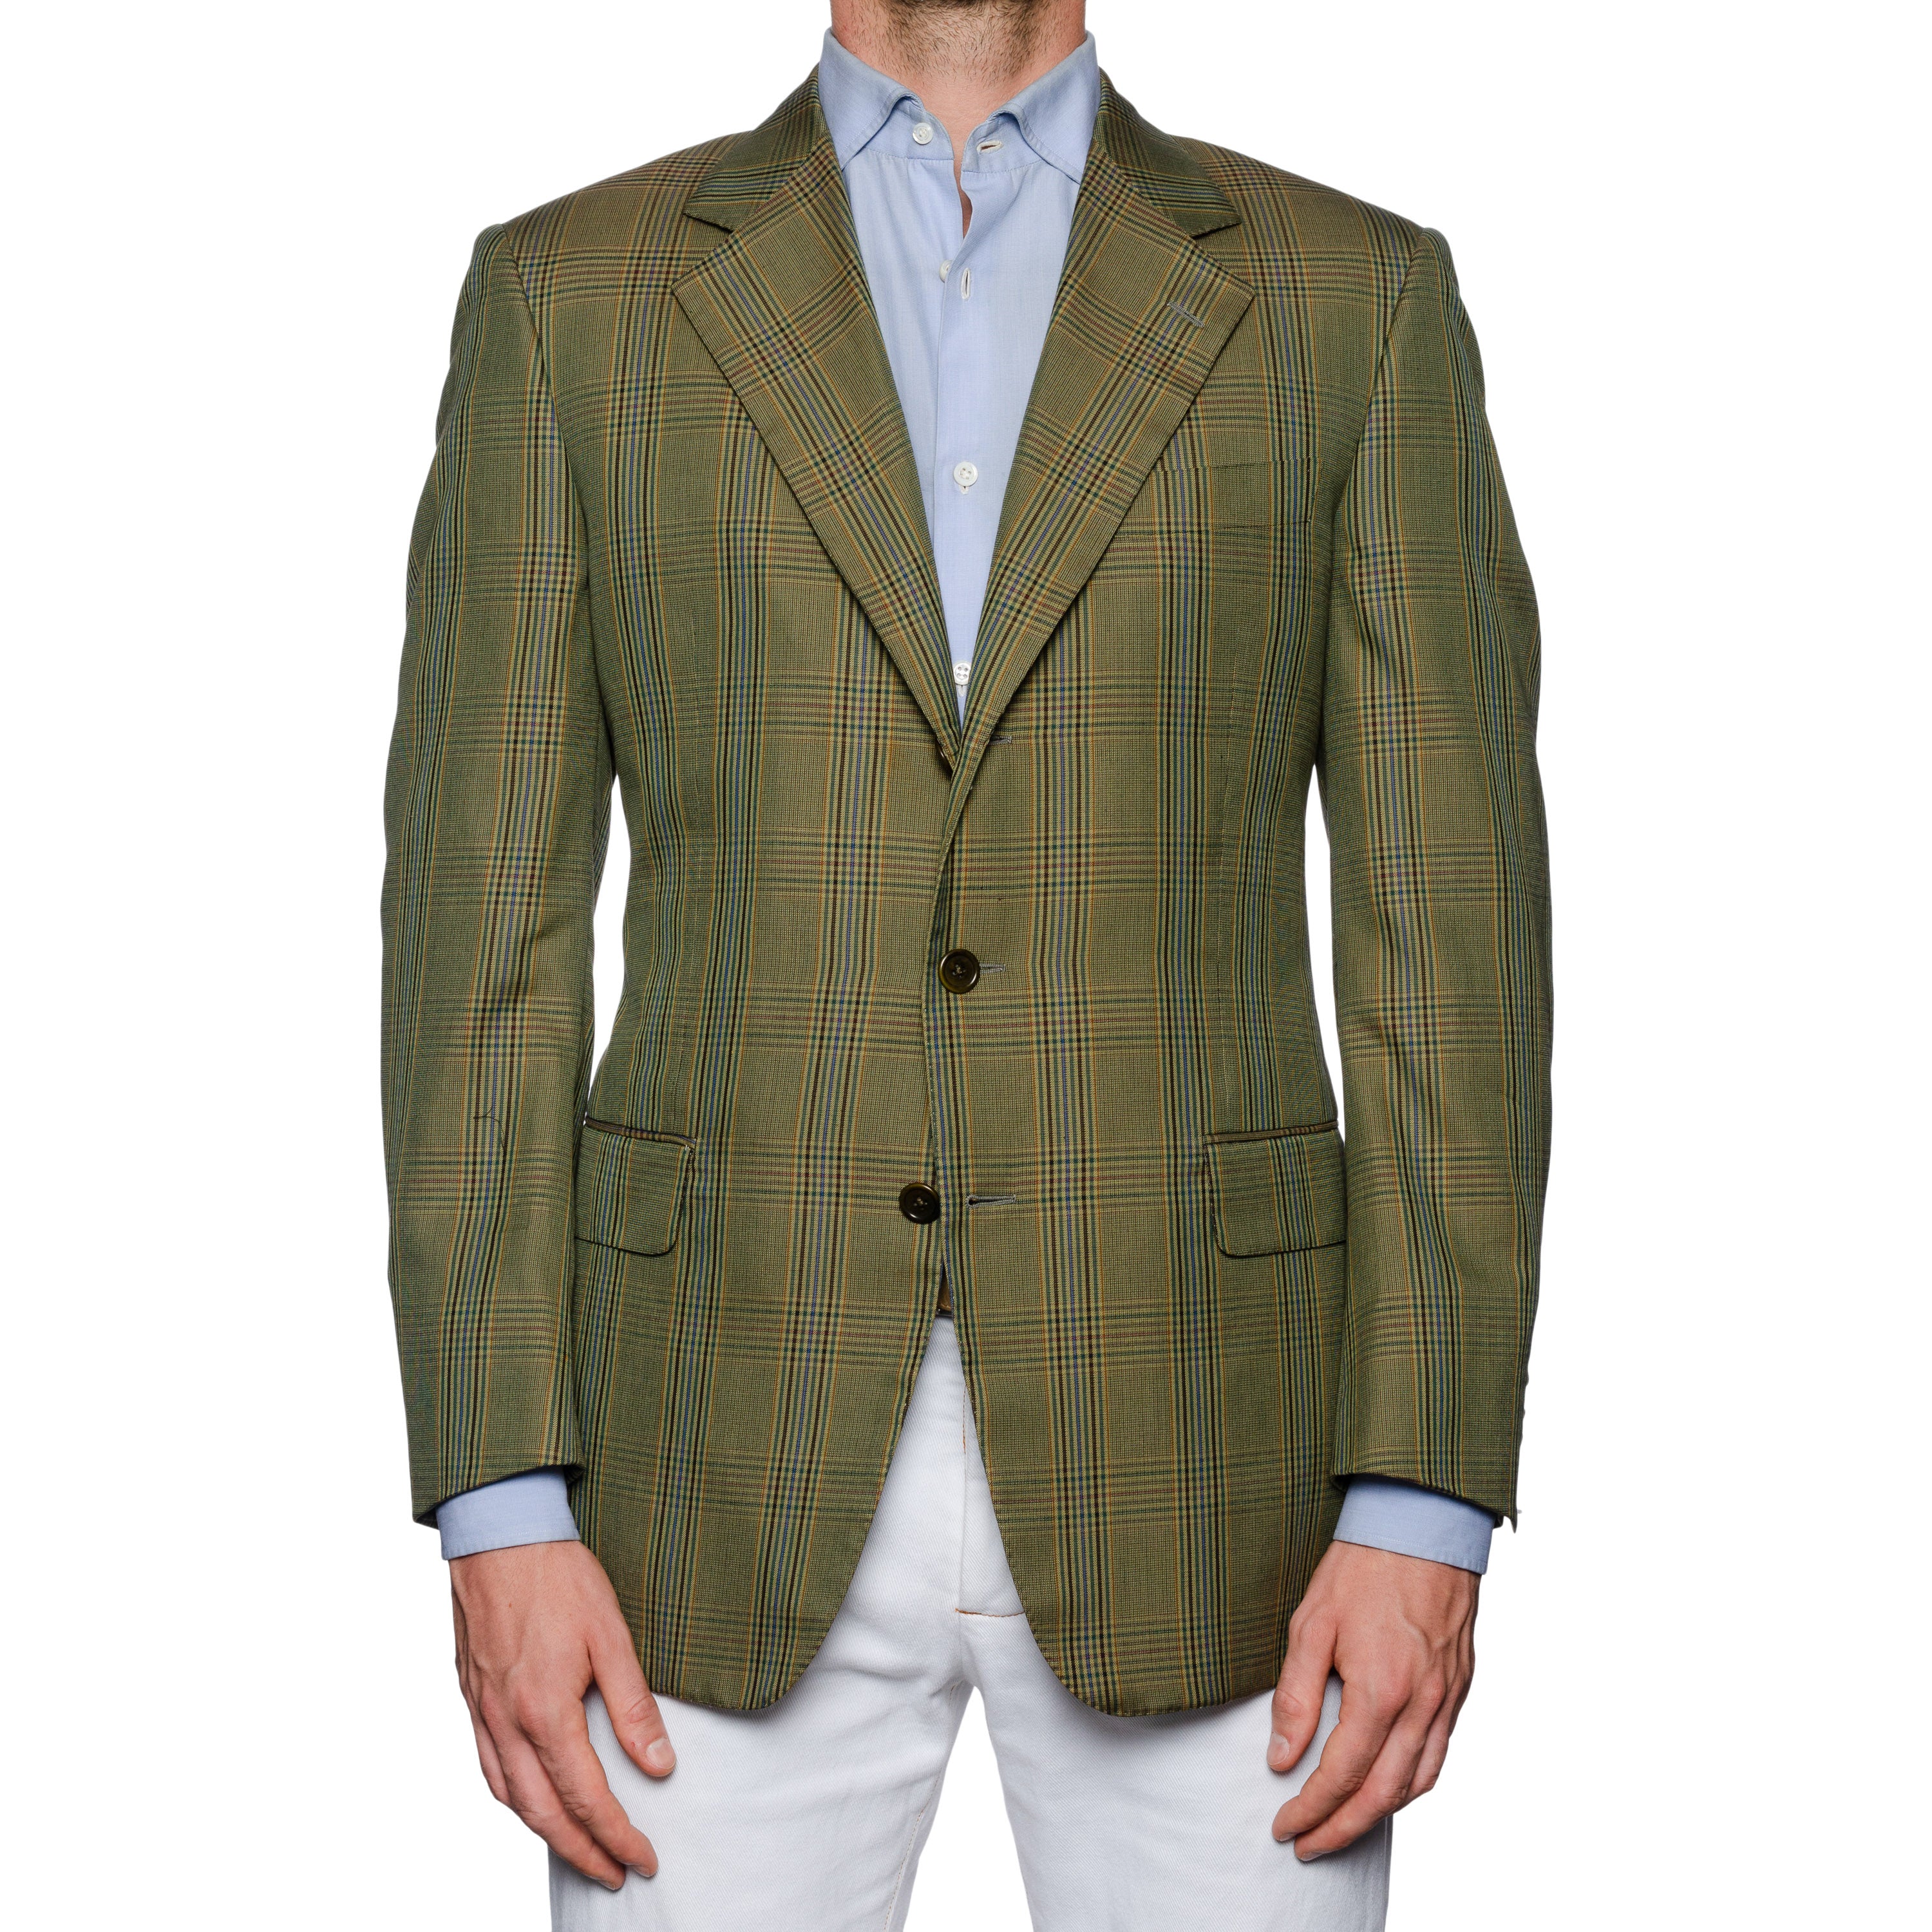 CASTANGIA 1850 Olive Prince of Wales Wool Super 100's Jacket EU 50 NEW US 40 CASTANGIA